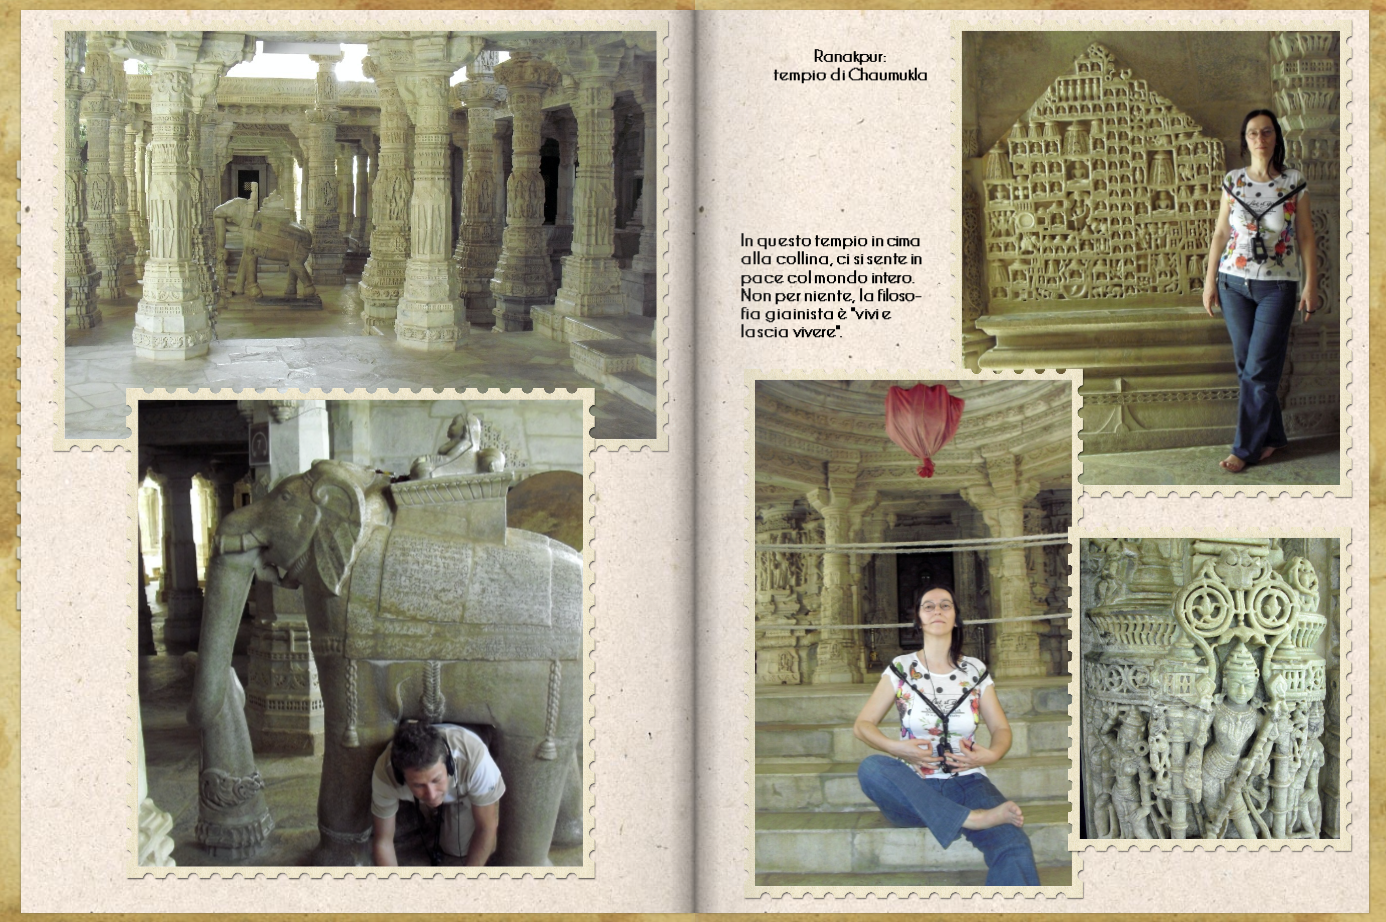 India pag 24